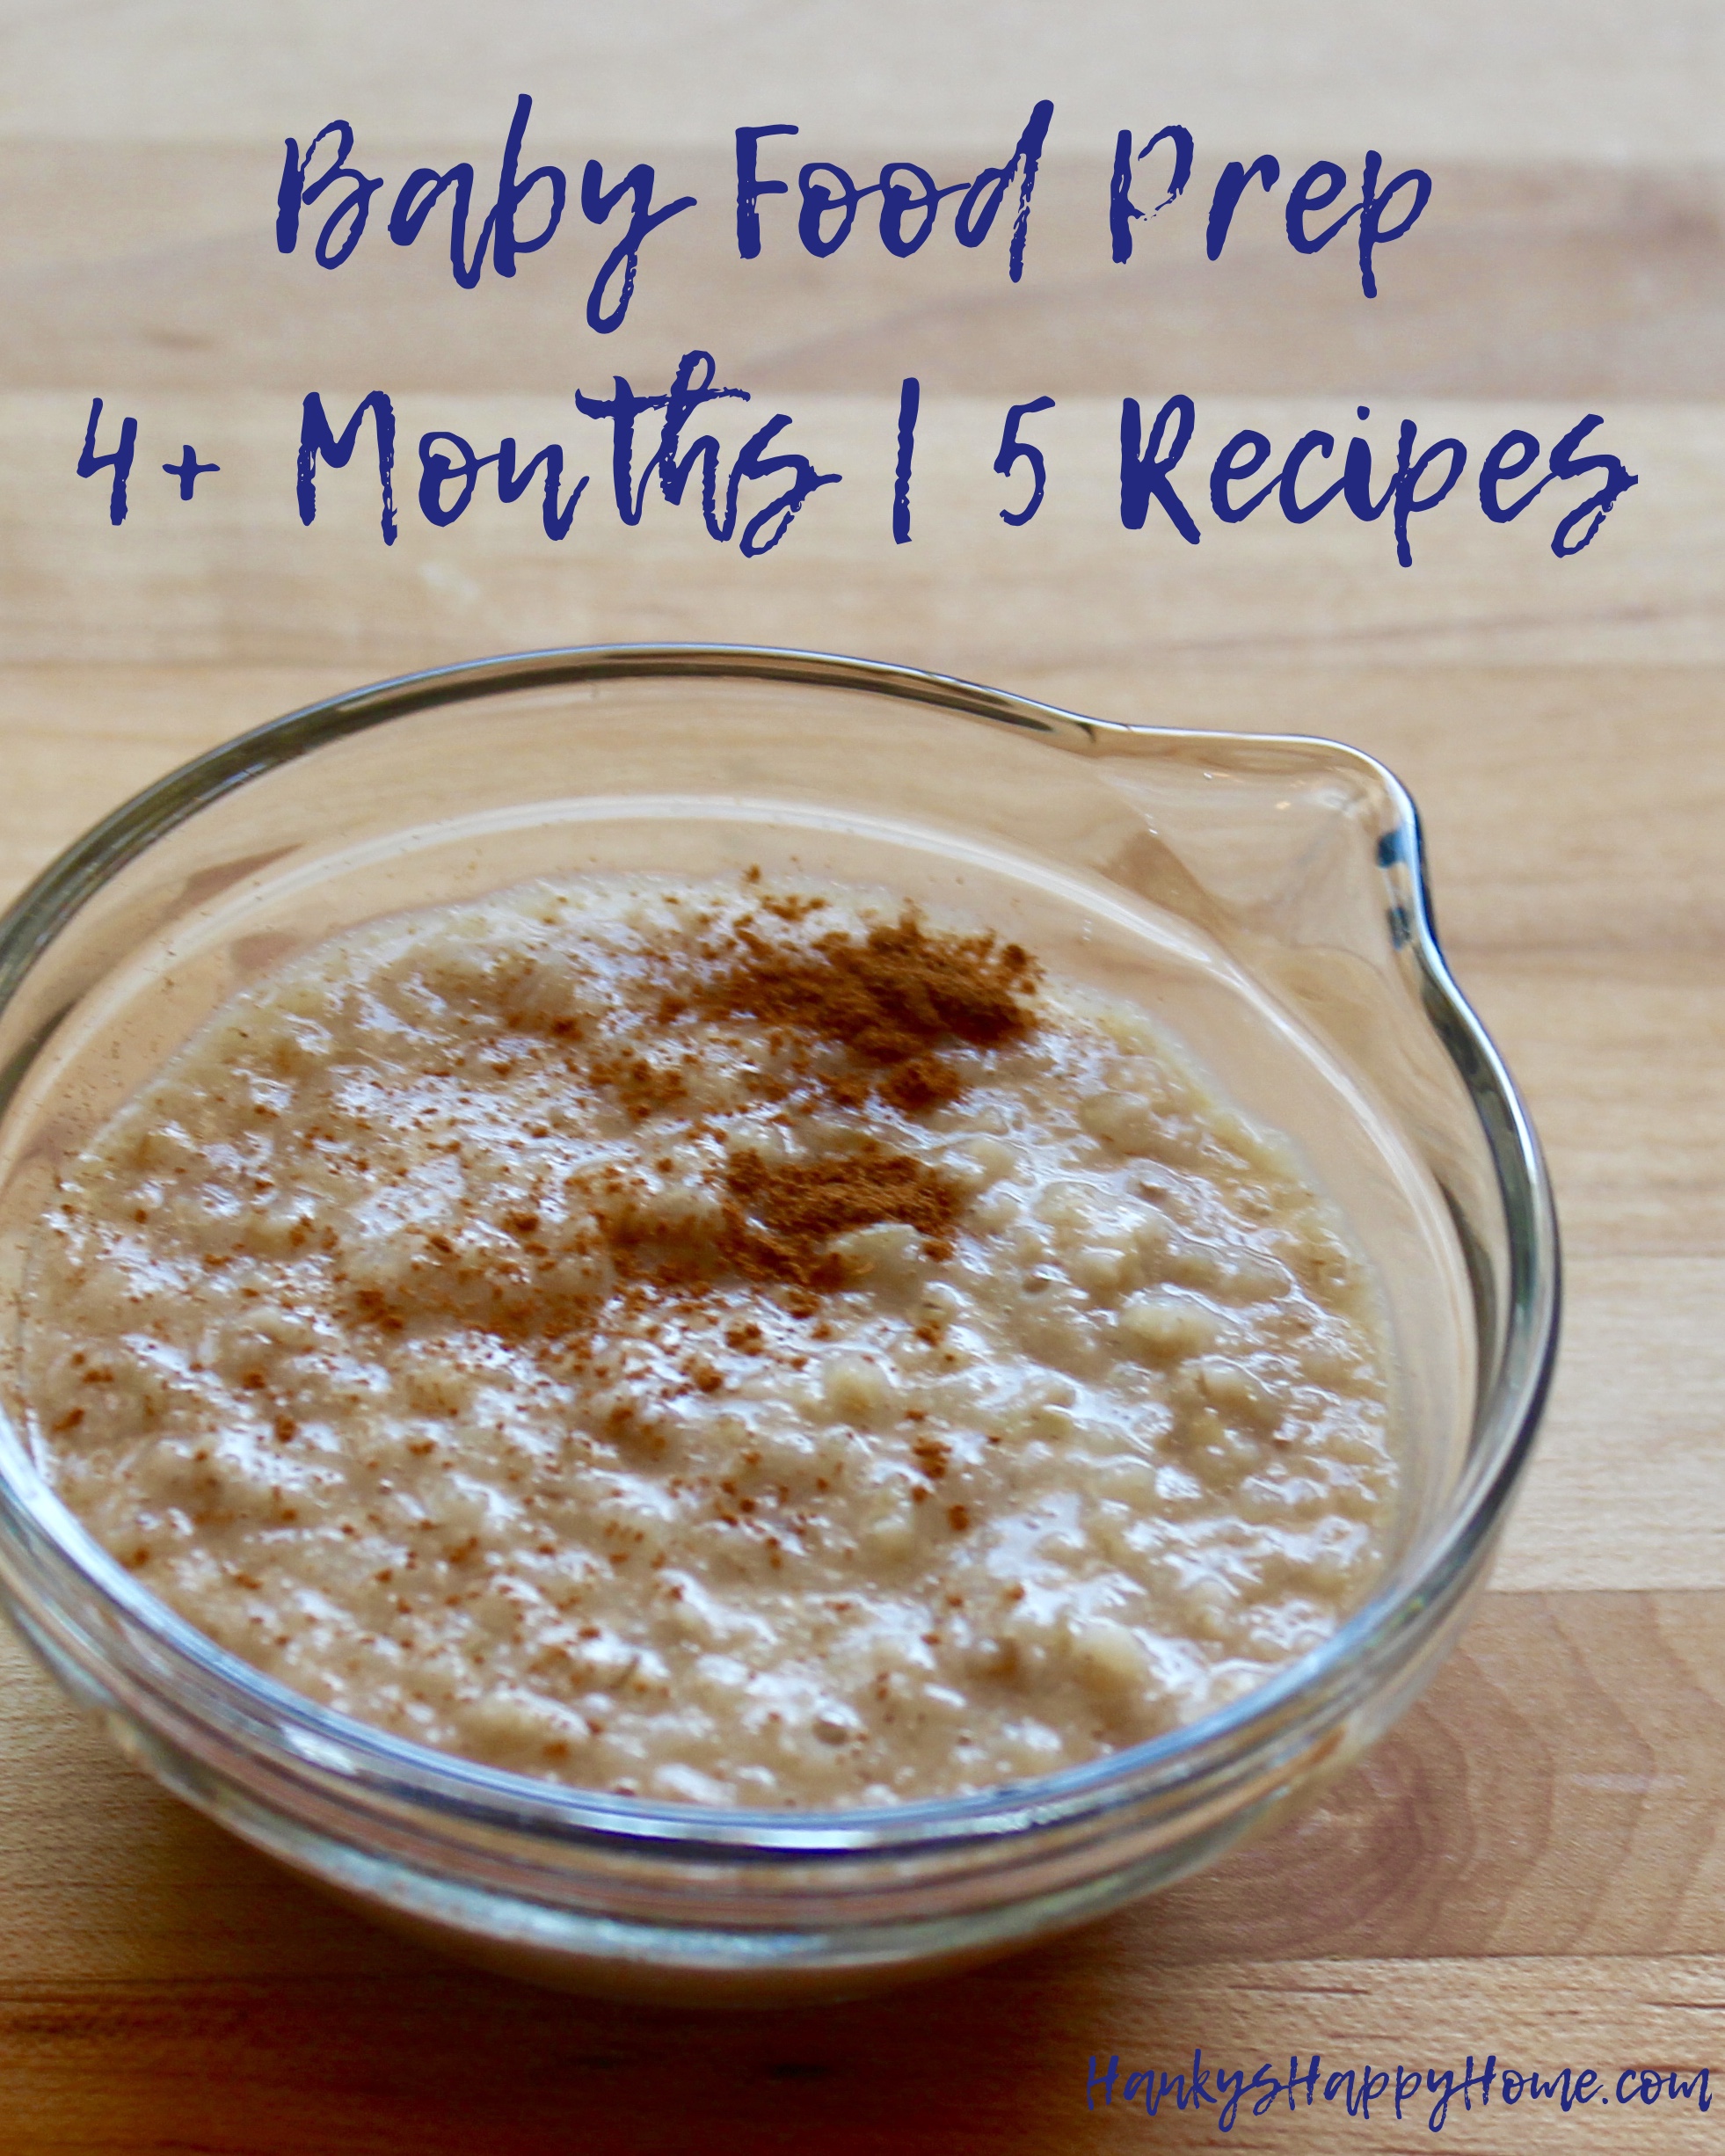 https://hankyshappyhome.com/wp-content/uploads/2017/08/baby-food-prep-4-months-5-recipes-oatmeal.jpeg